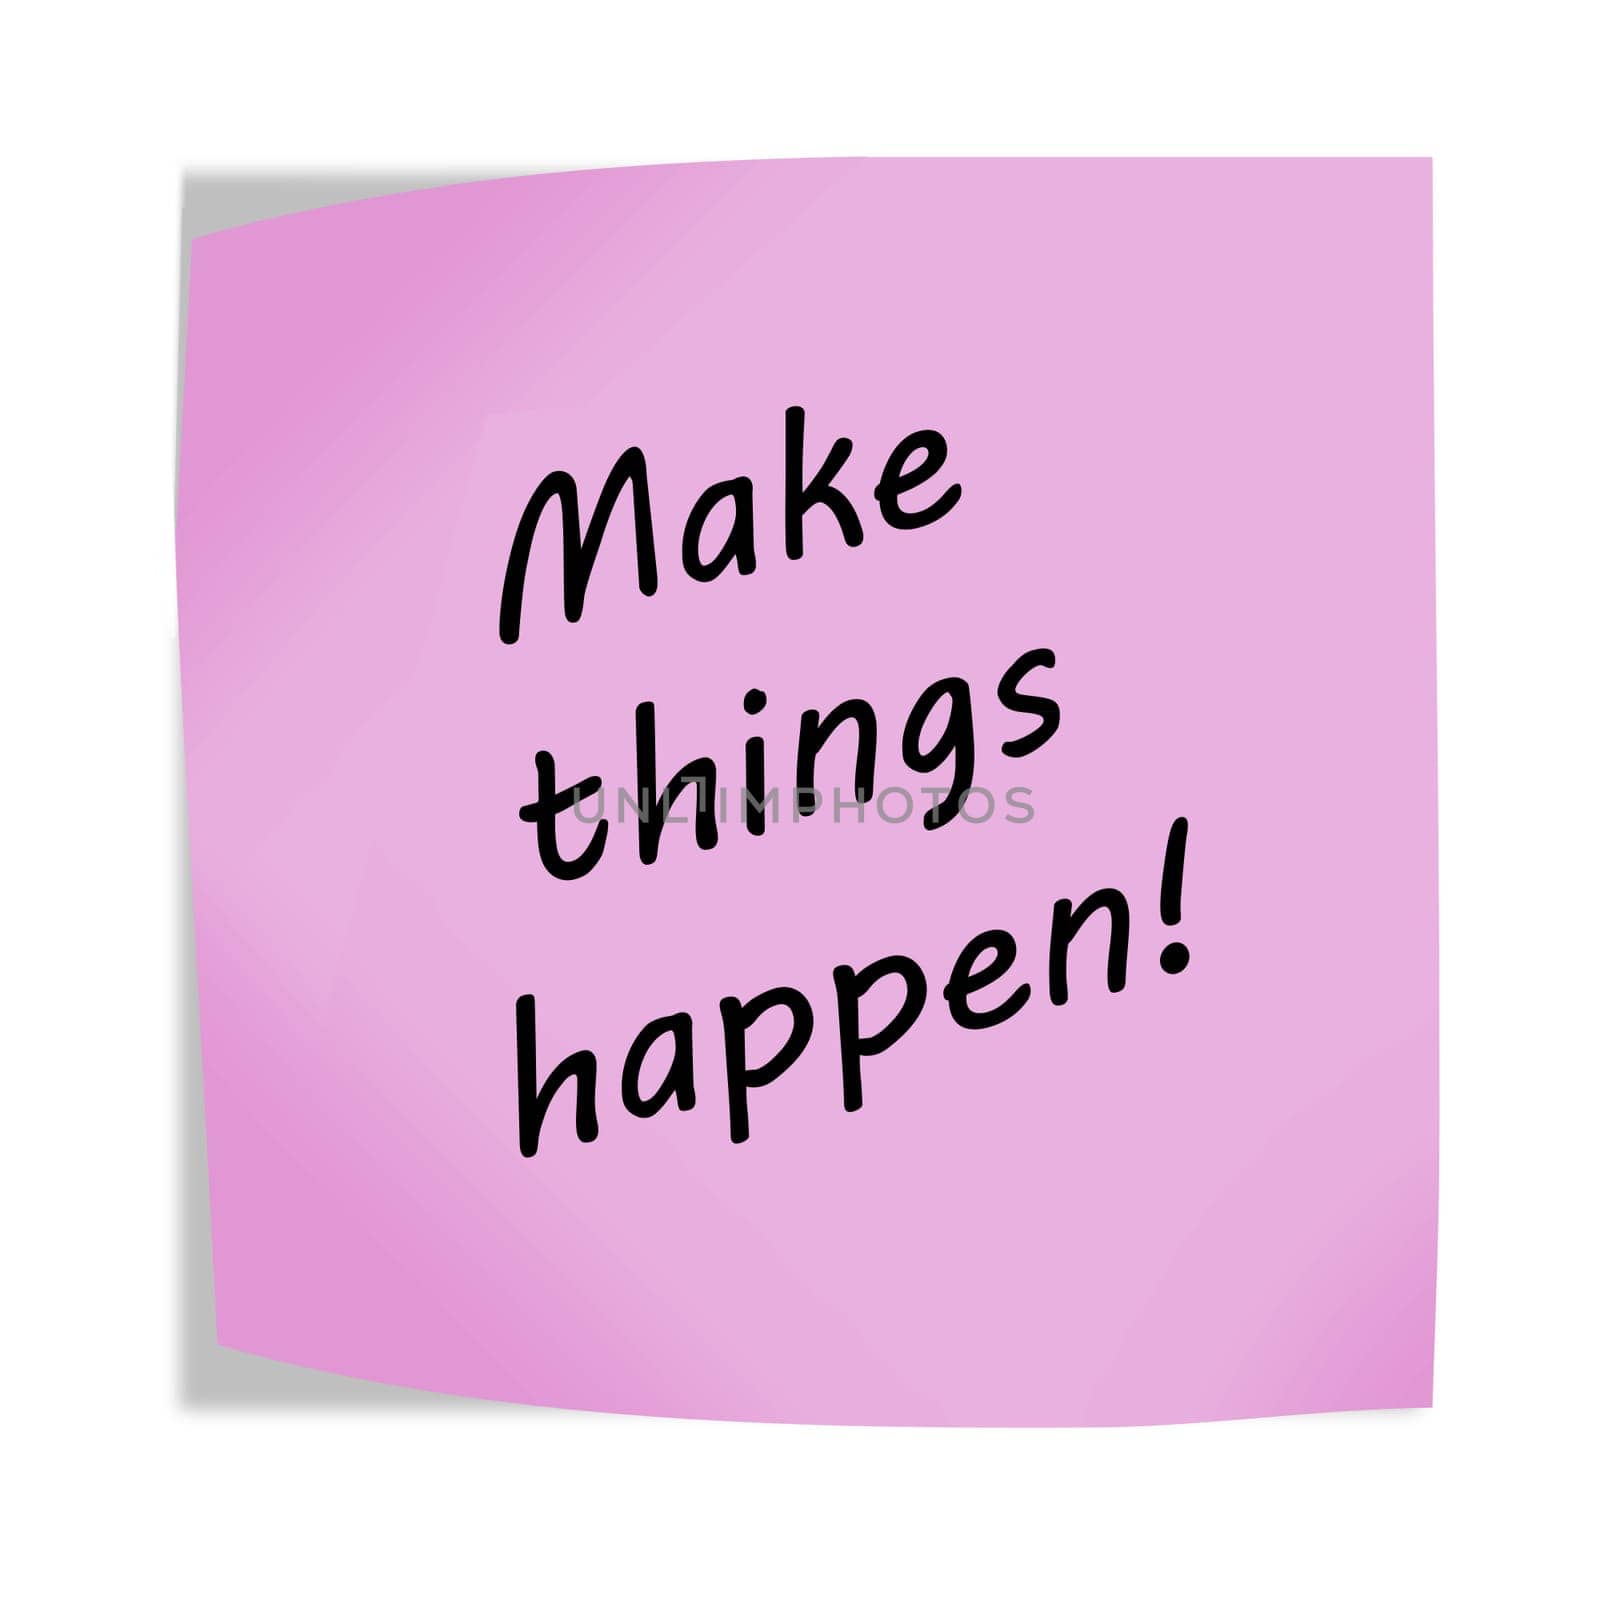 A Make things happen 3d illustration post note reminder on white with clipping path